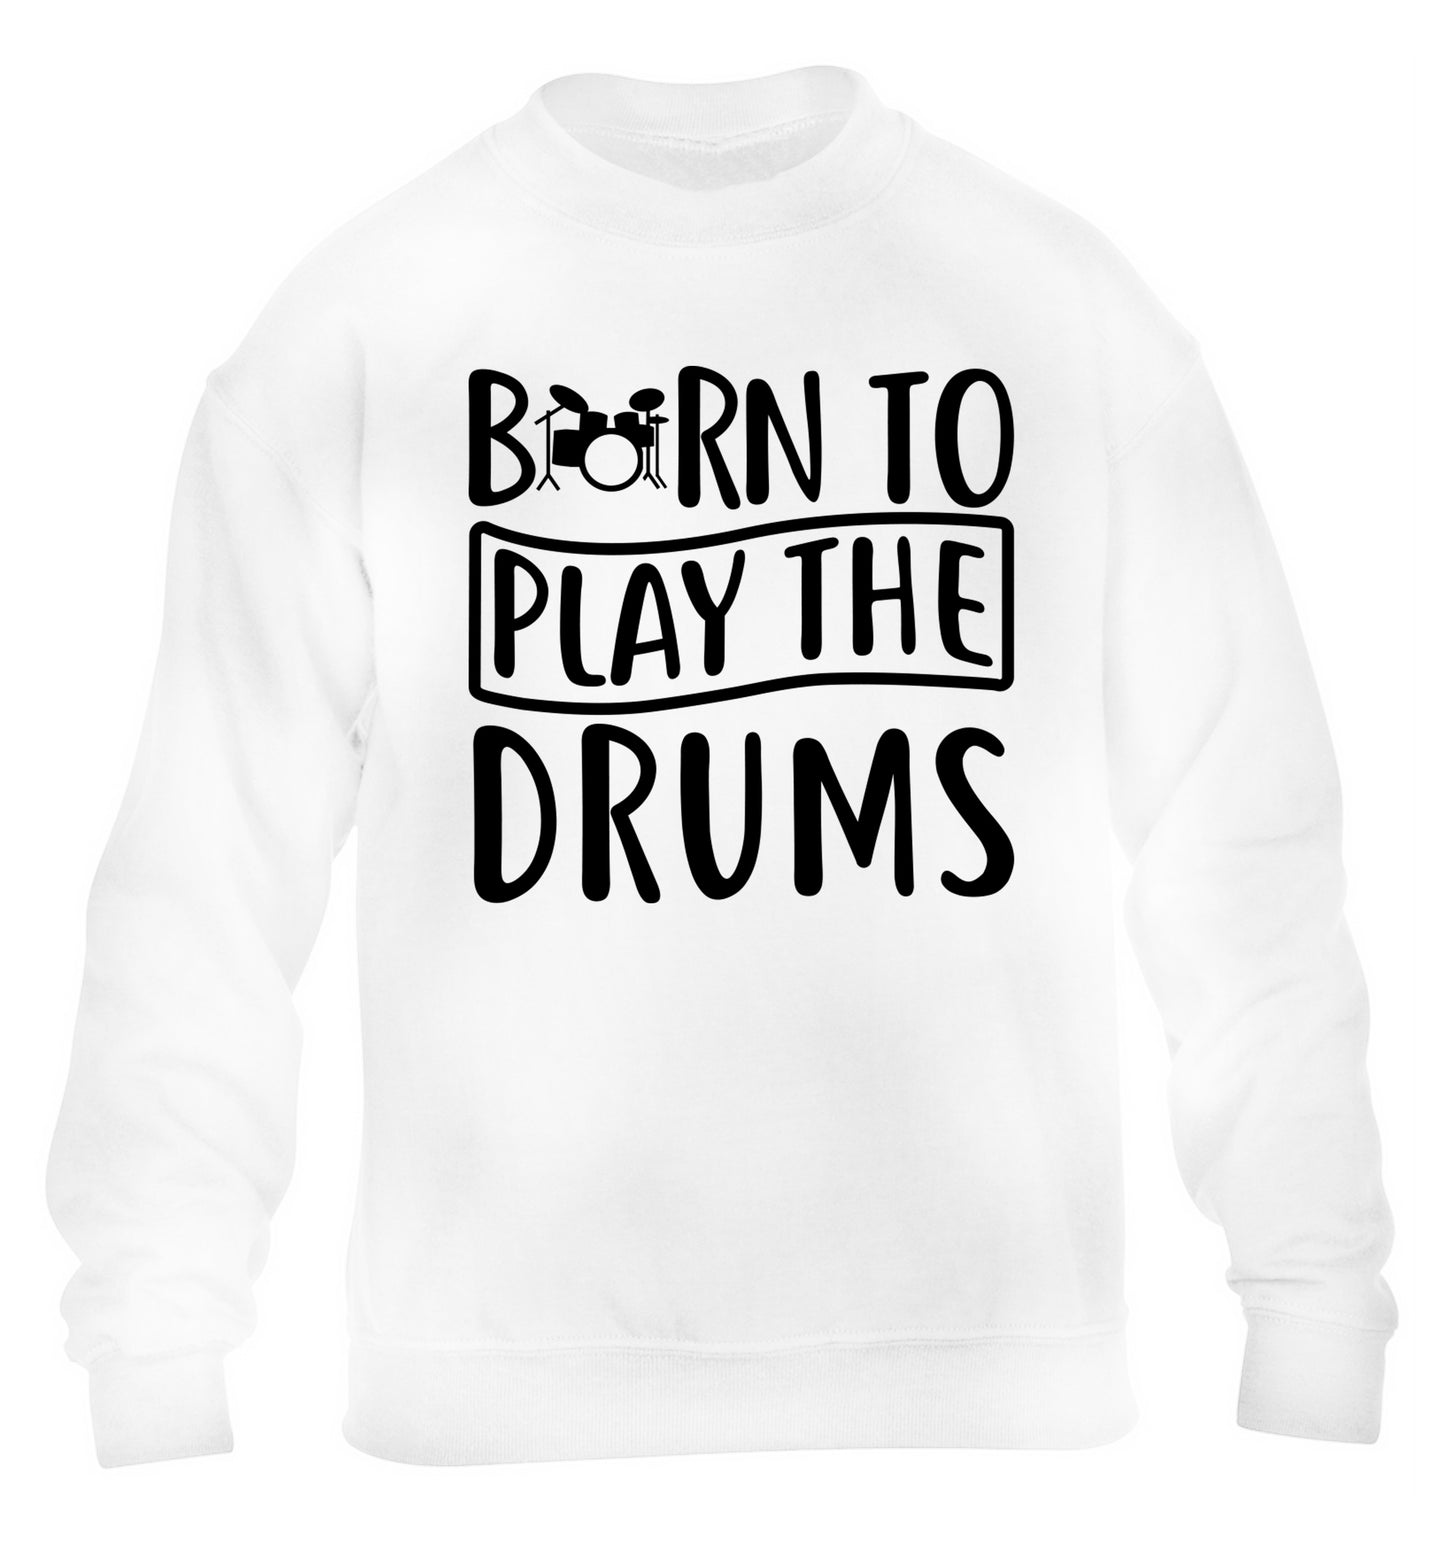 Born to play the drums children's white sweater 12-14 Years